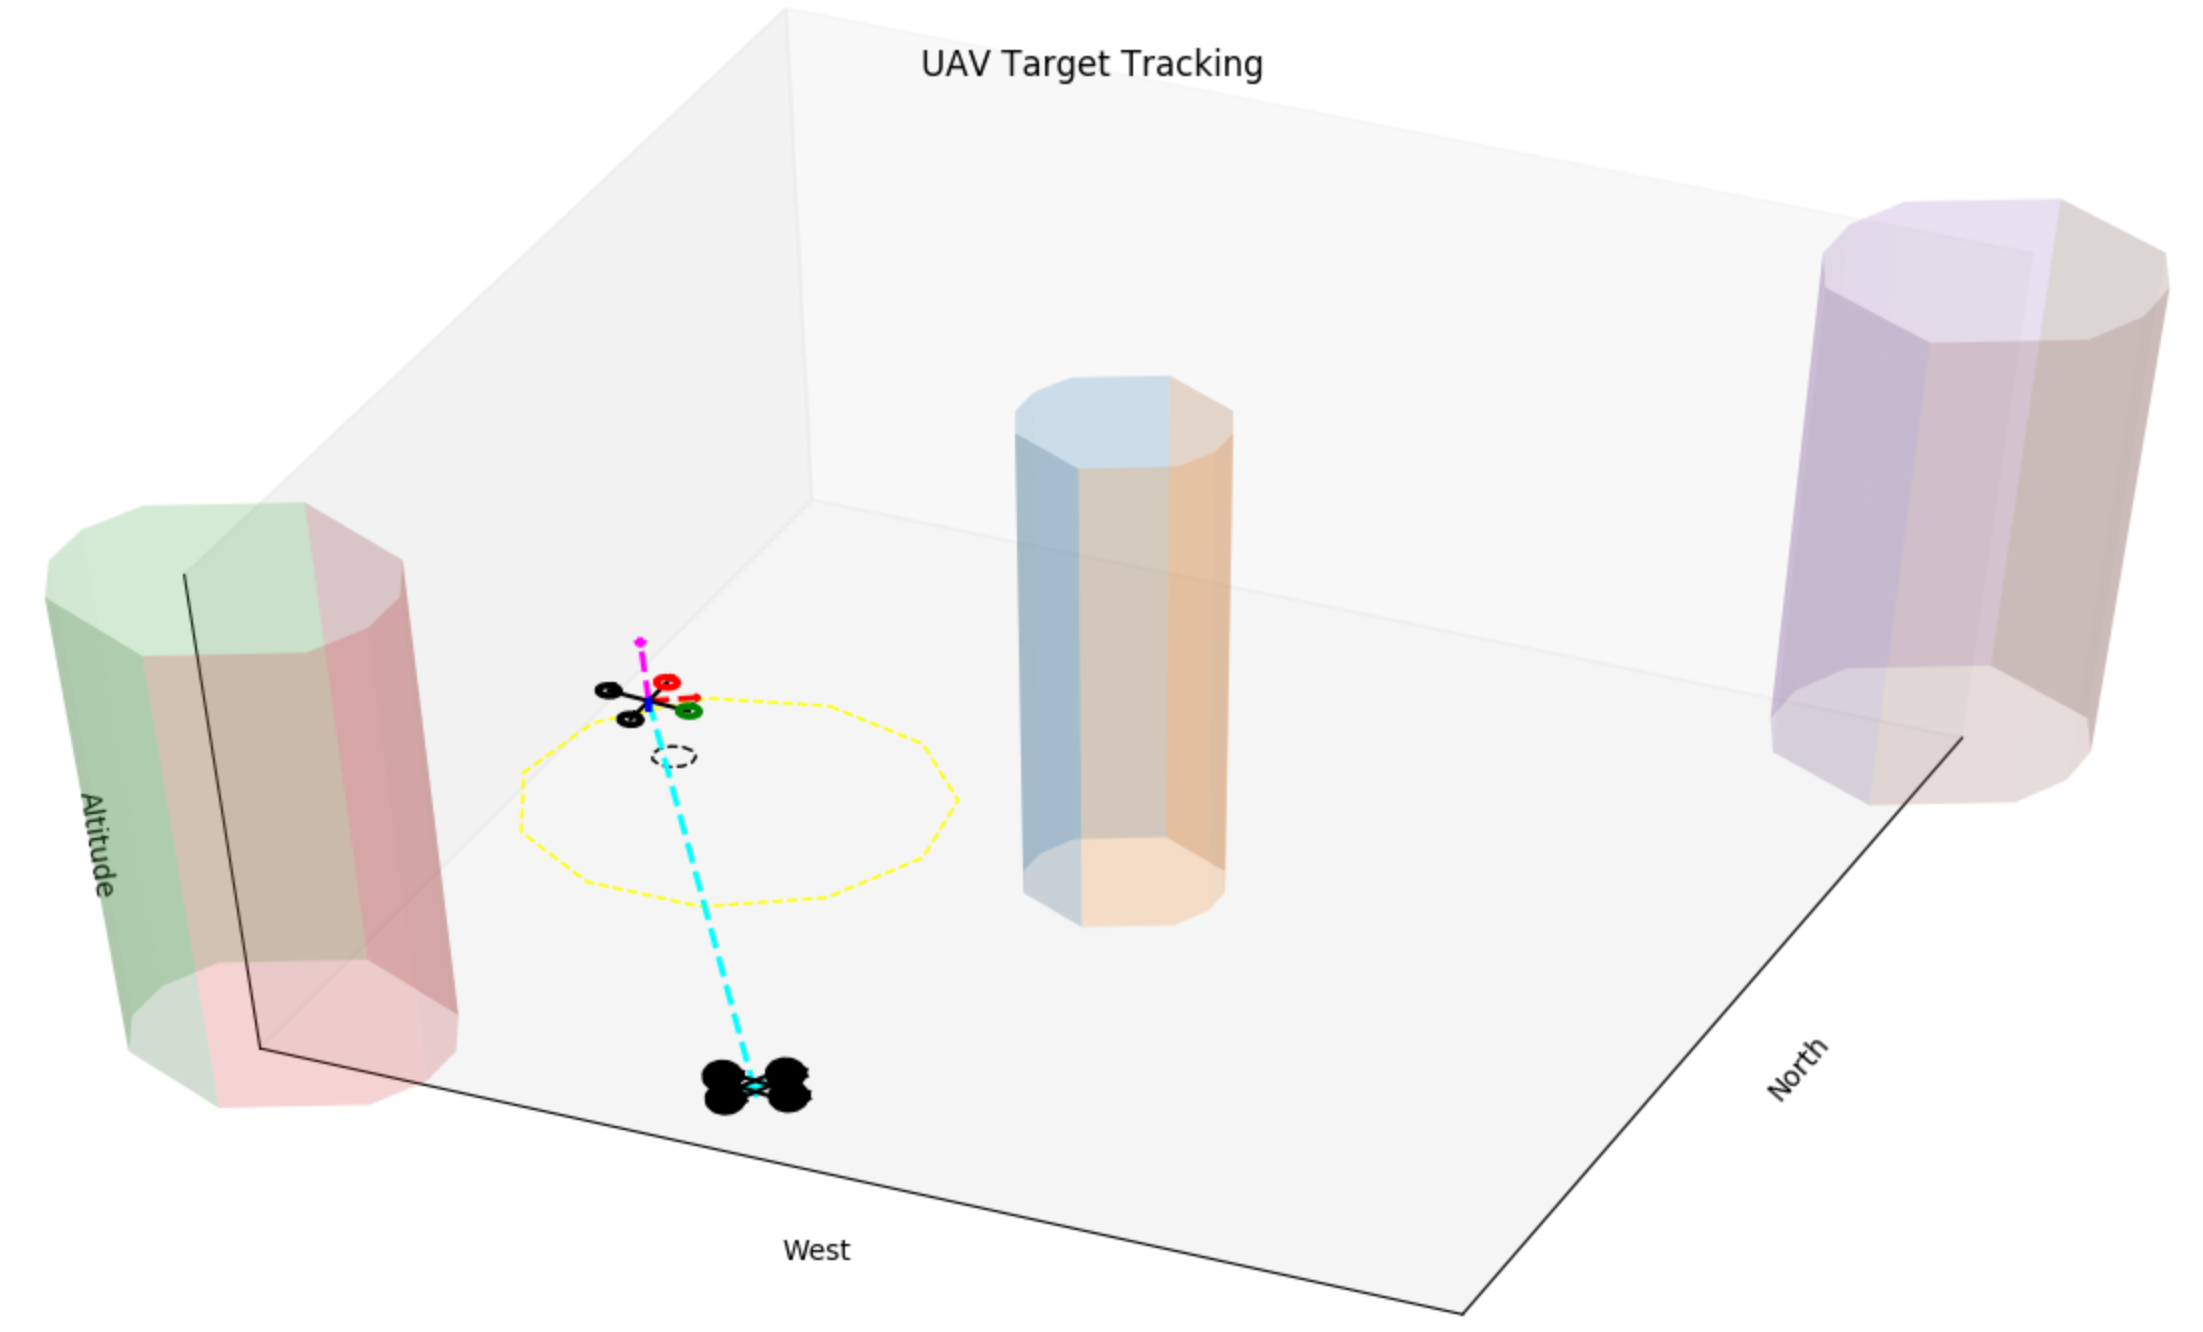 Proportional Navigation Applied to Ground Target Tracking